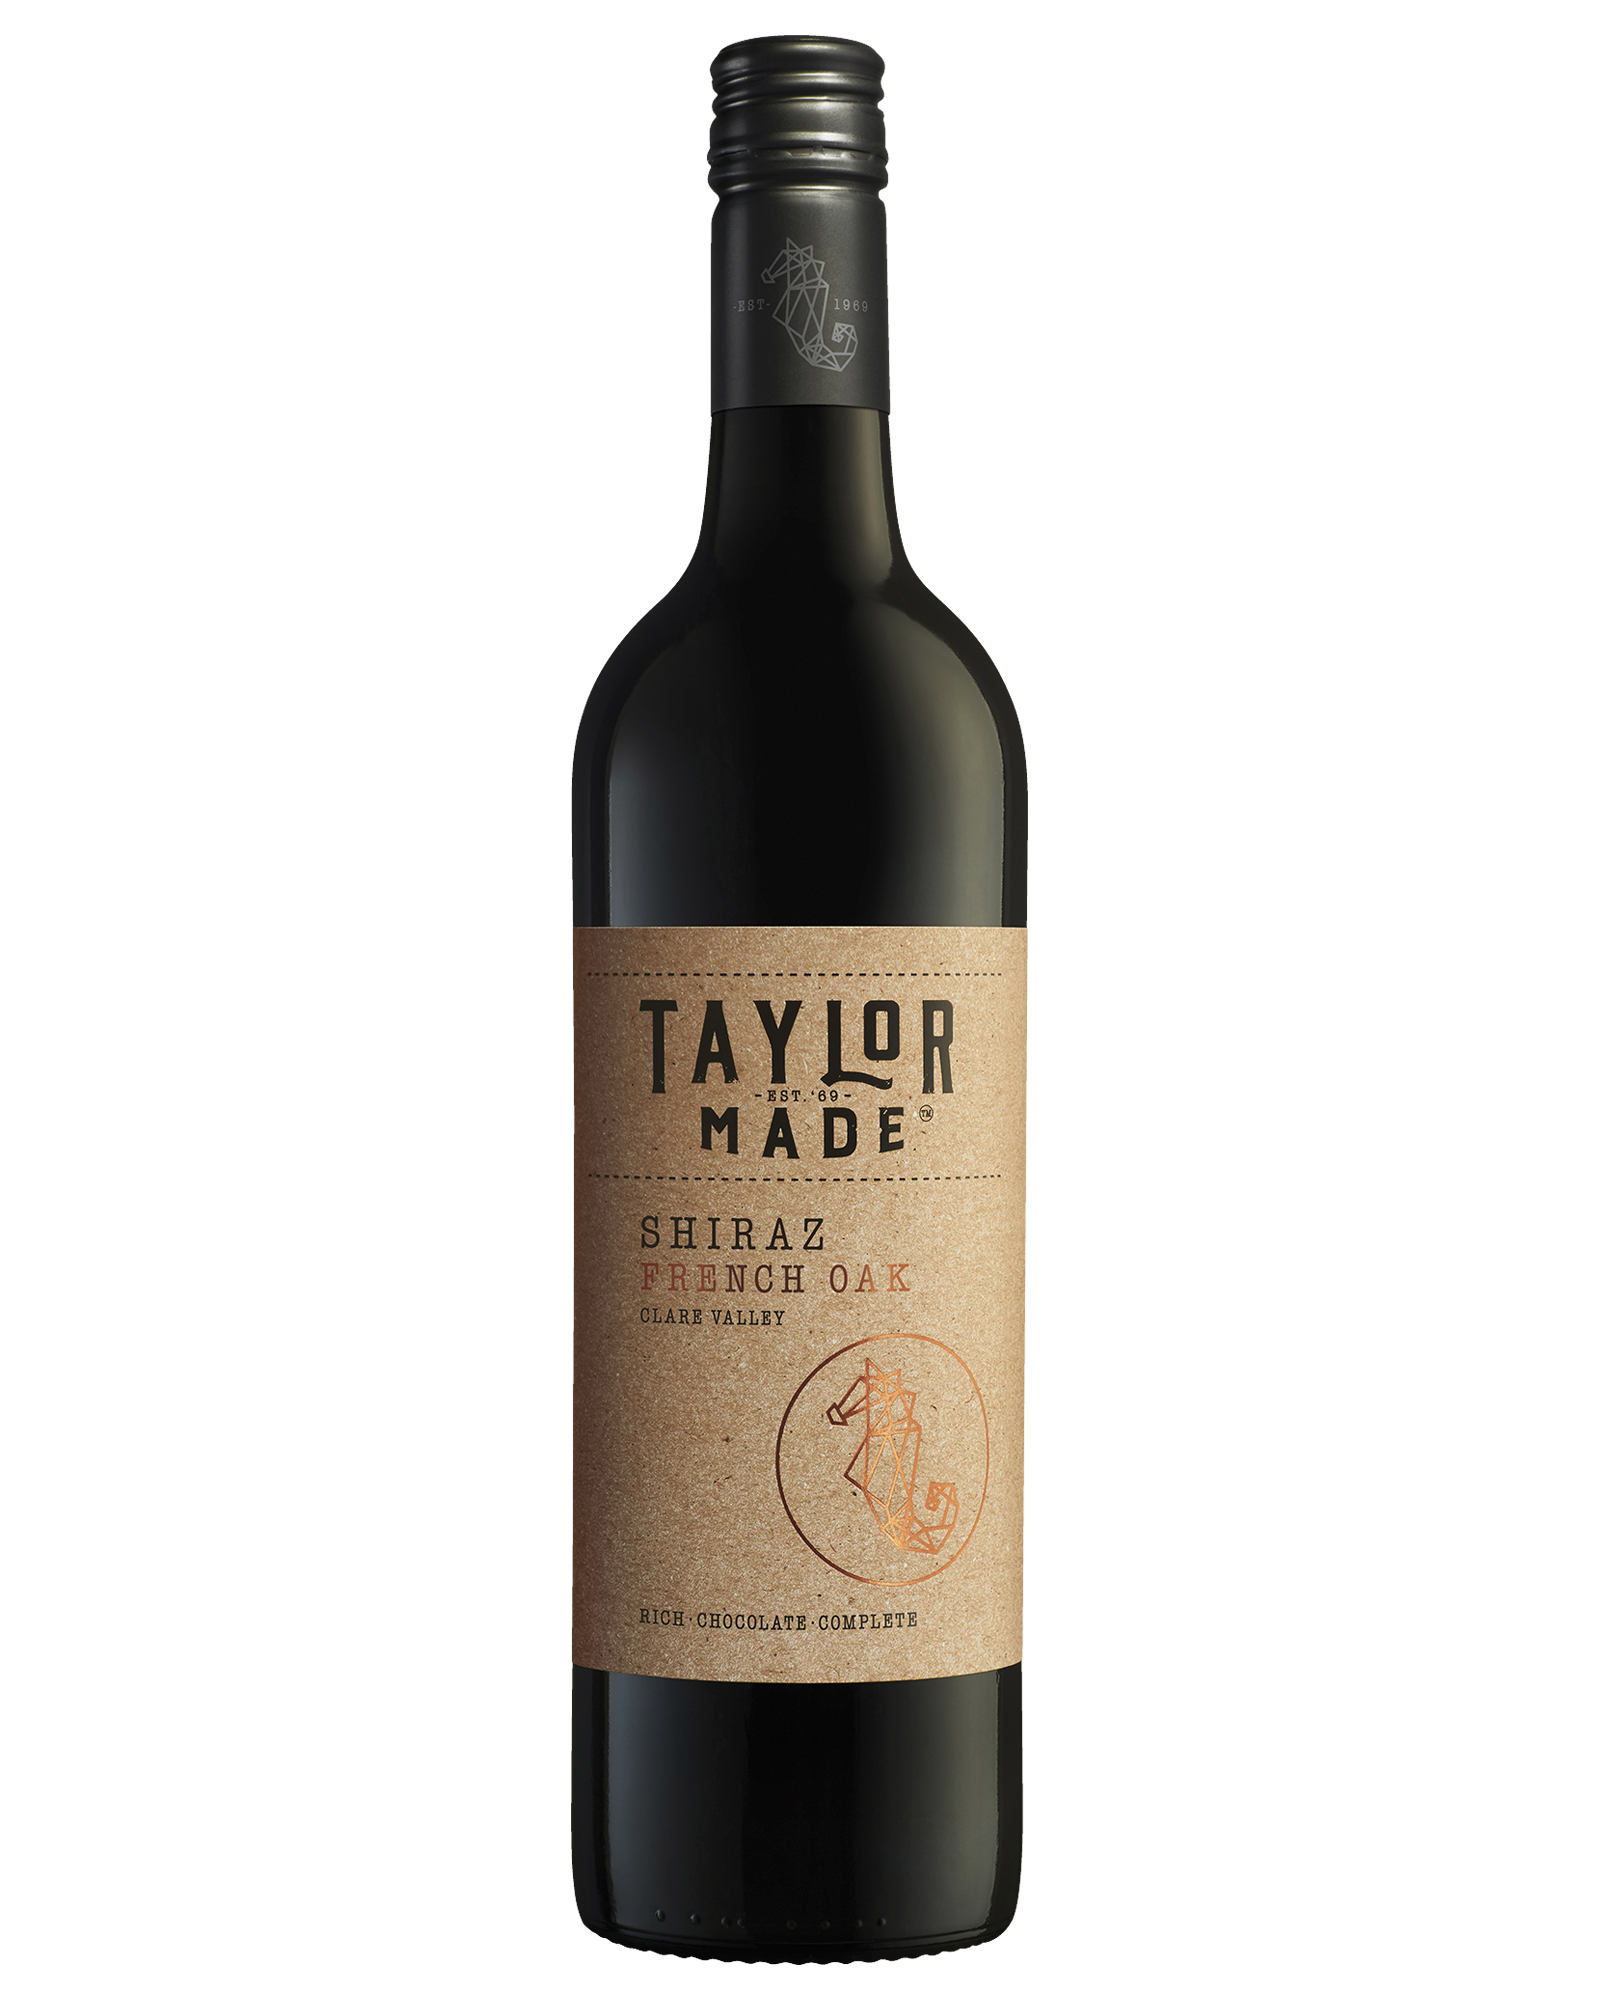 Taylor Made French Oak Clare Valley Shiraz